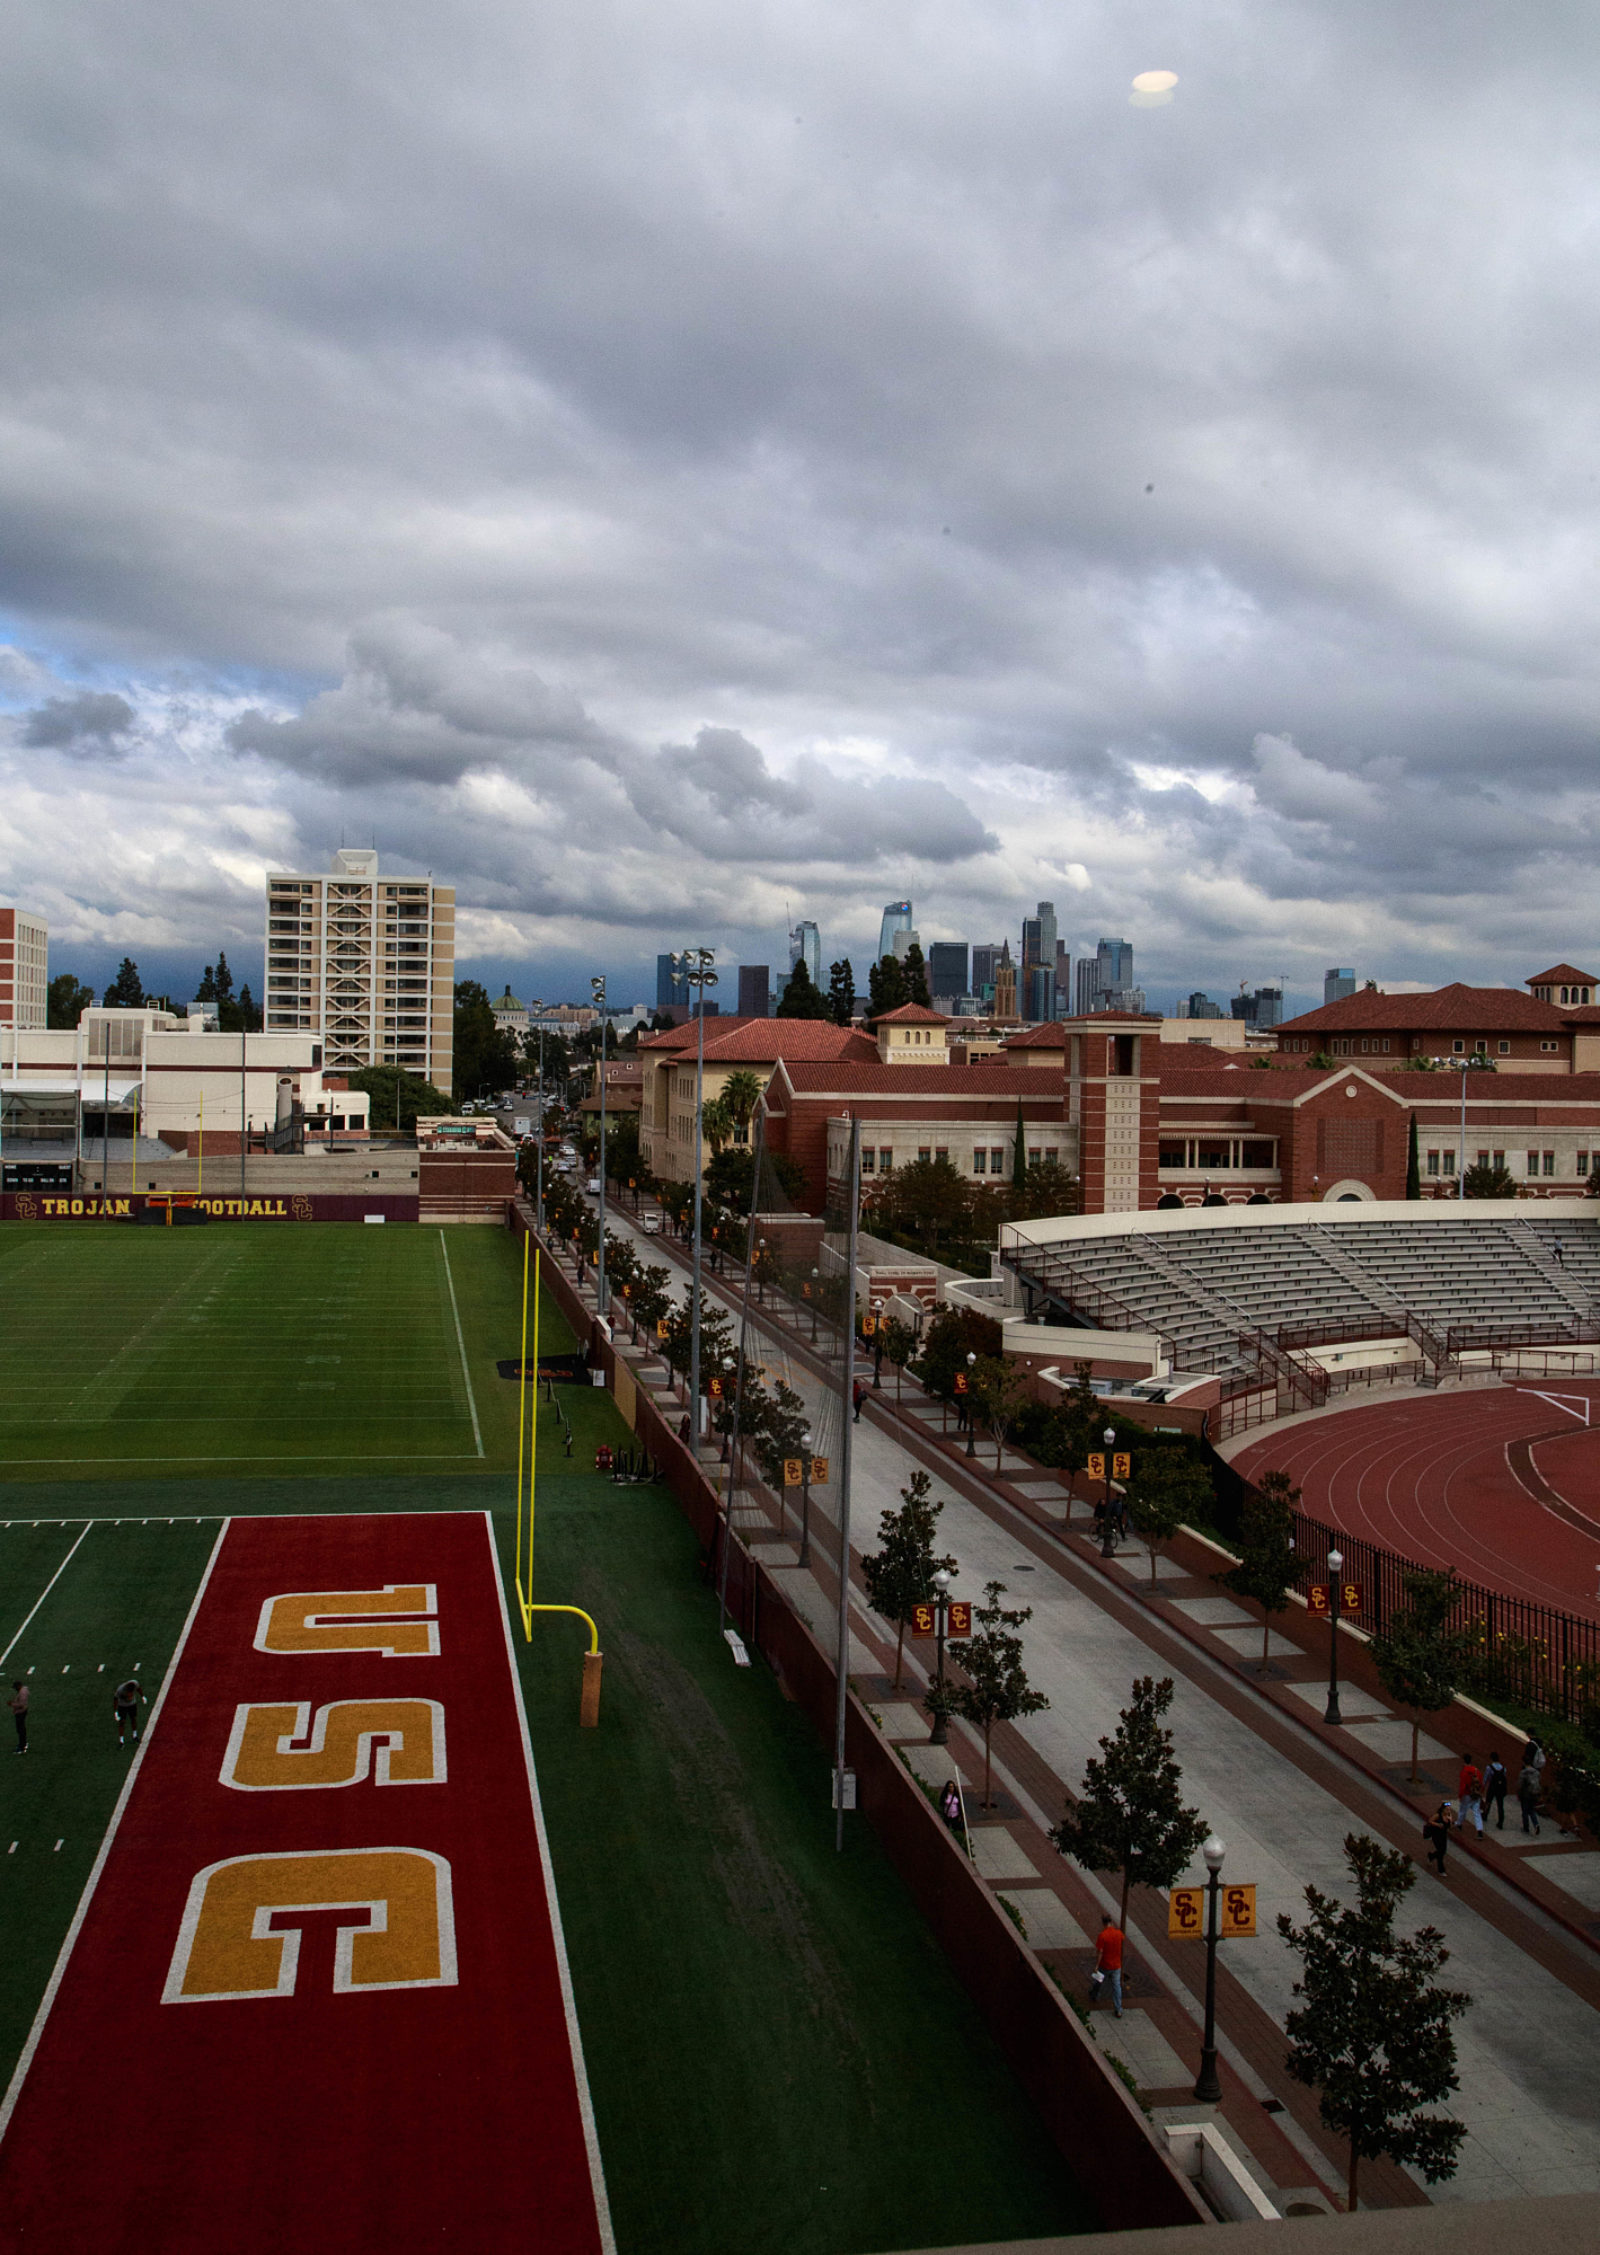 The USC school football court is an outdoor sports facility with a green field, bleachers for spectators.